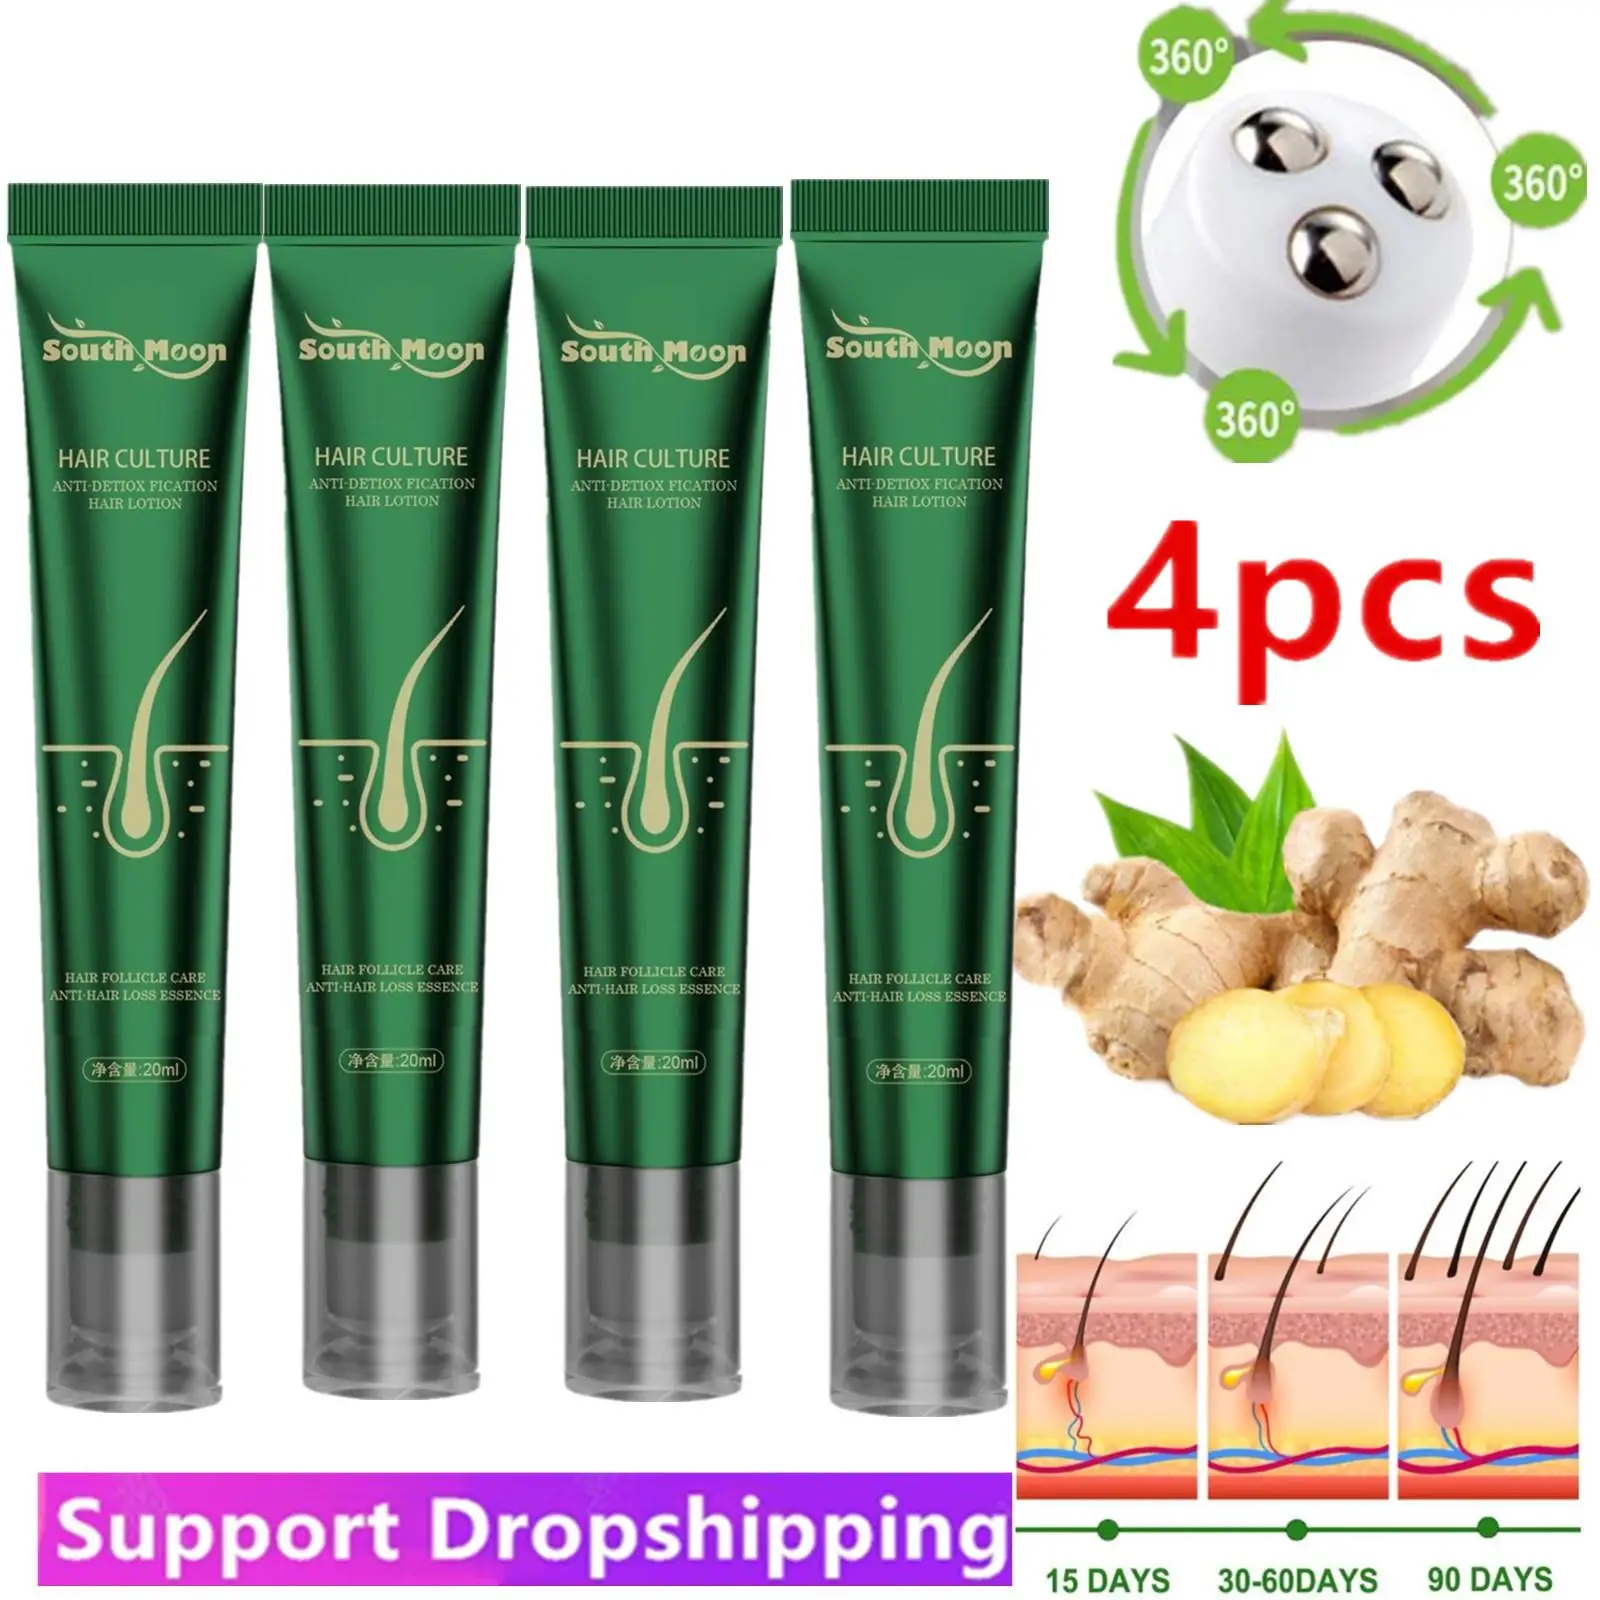 

4Pcs Regrowth Organic Hair Serum Roller Hair Care Anti Stripping Liquid Suitable For All Types Of Hair Loss Scalp Nourishing